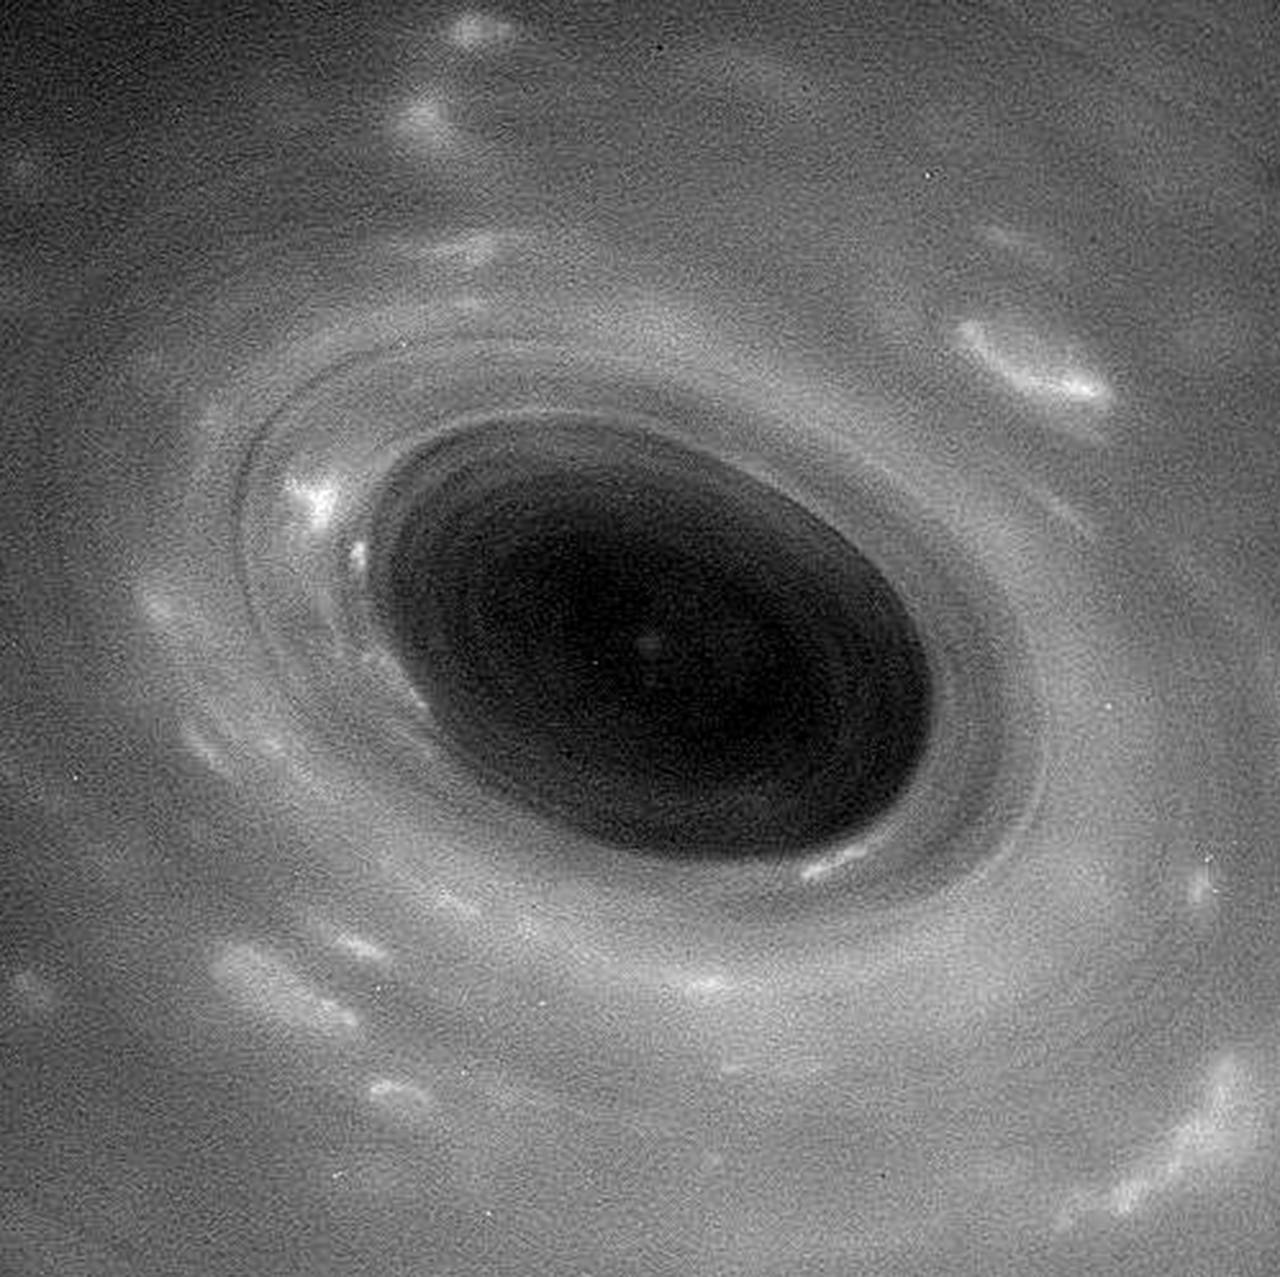 Cassini photographed this giant hurricane in Saturn’s atmosphere. (NASA, JPL-Caltech, Space Science Institute)